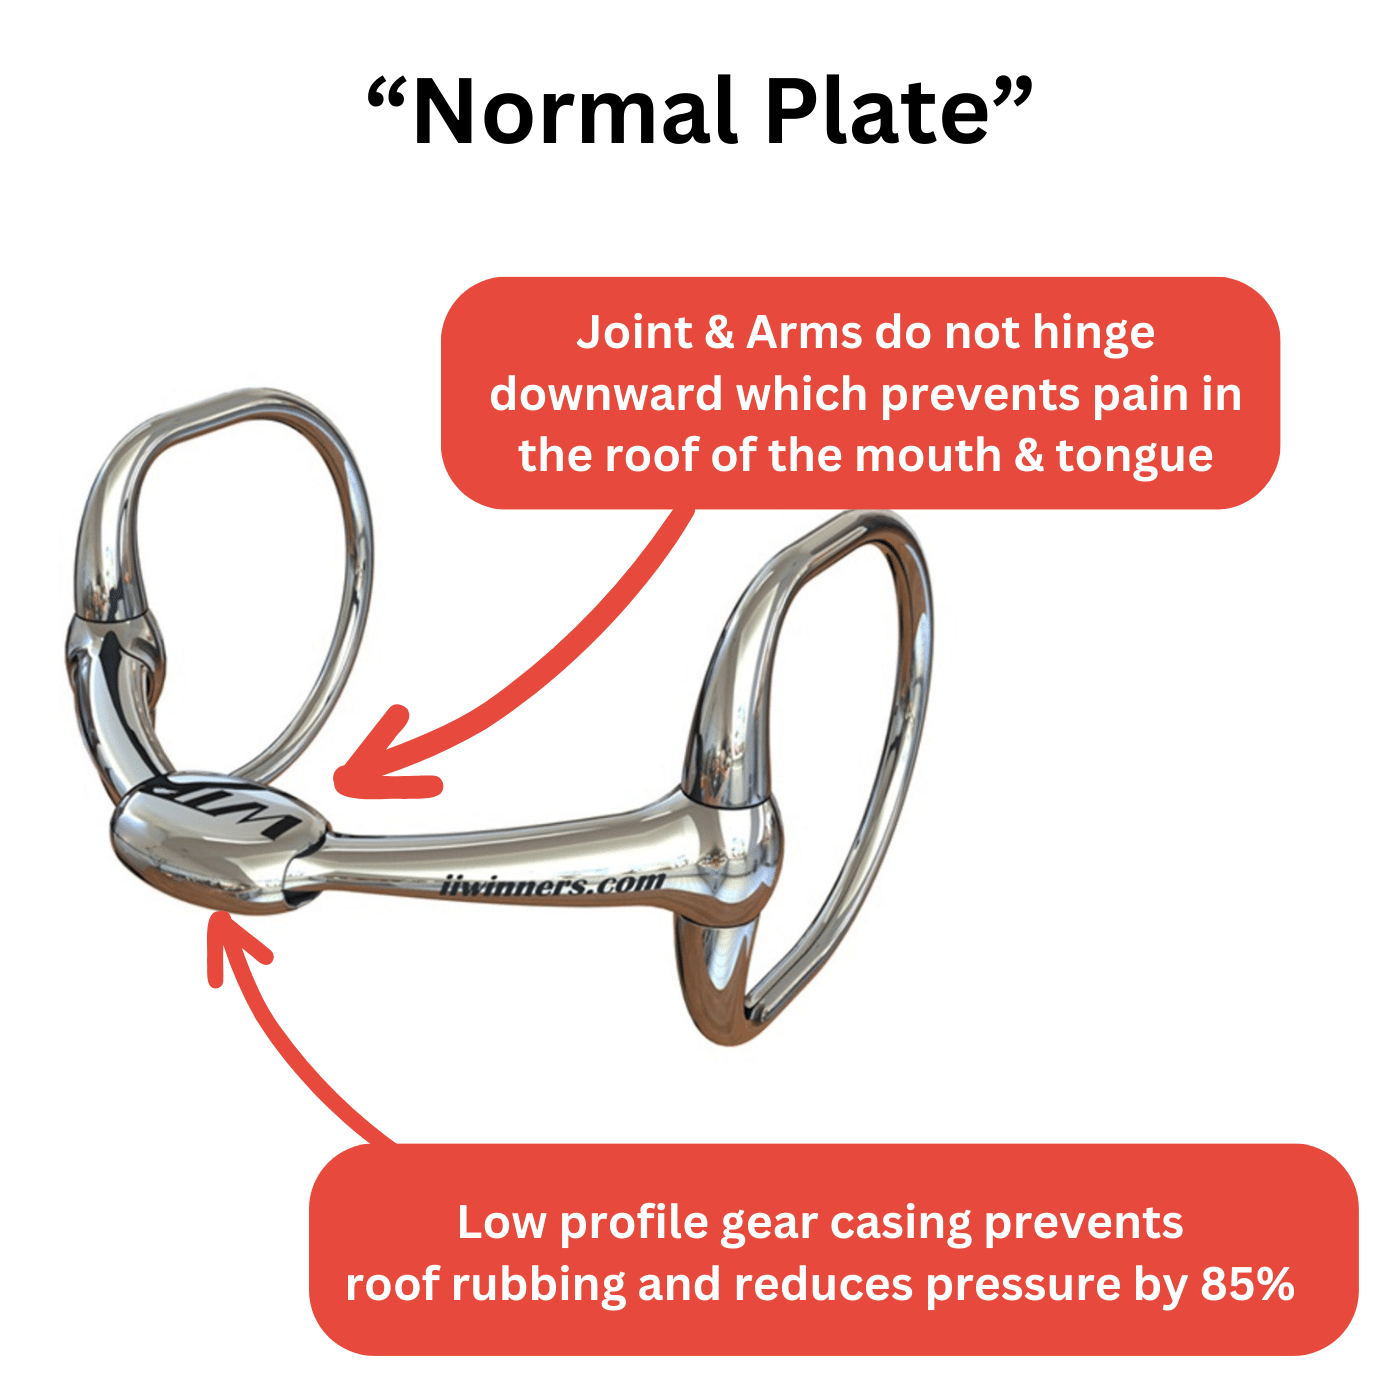 WTP (Winning Tongue Plate) Eggbutt Bit with Normal Plate